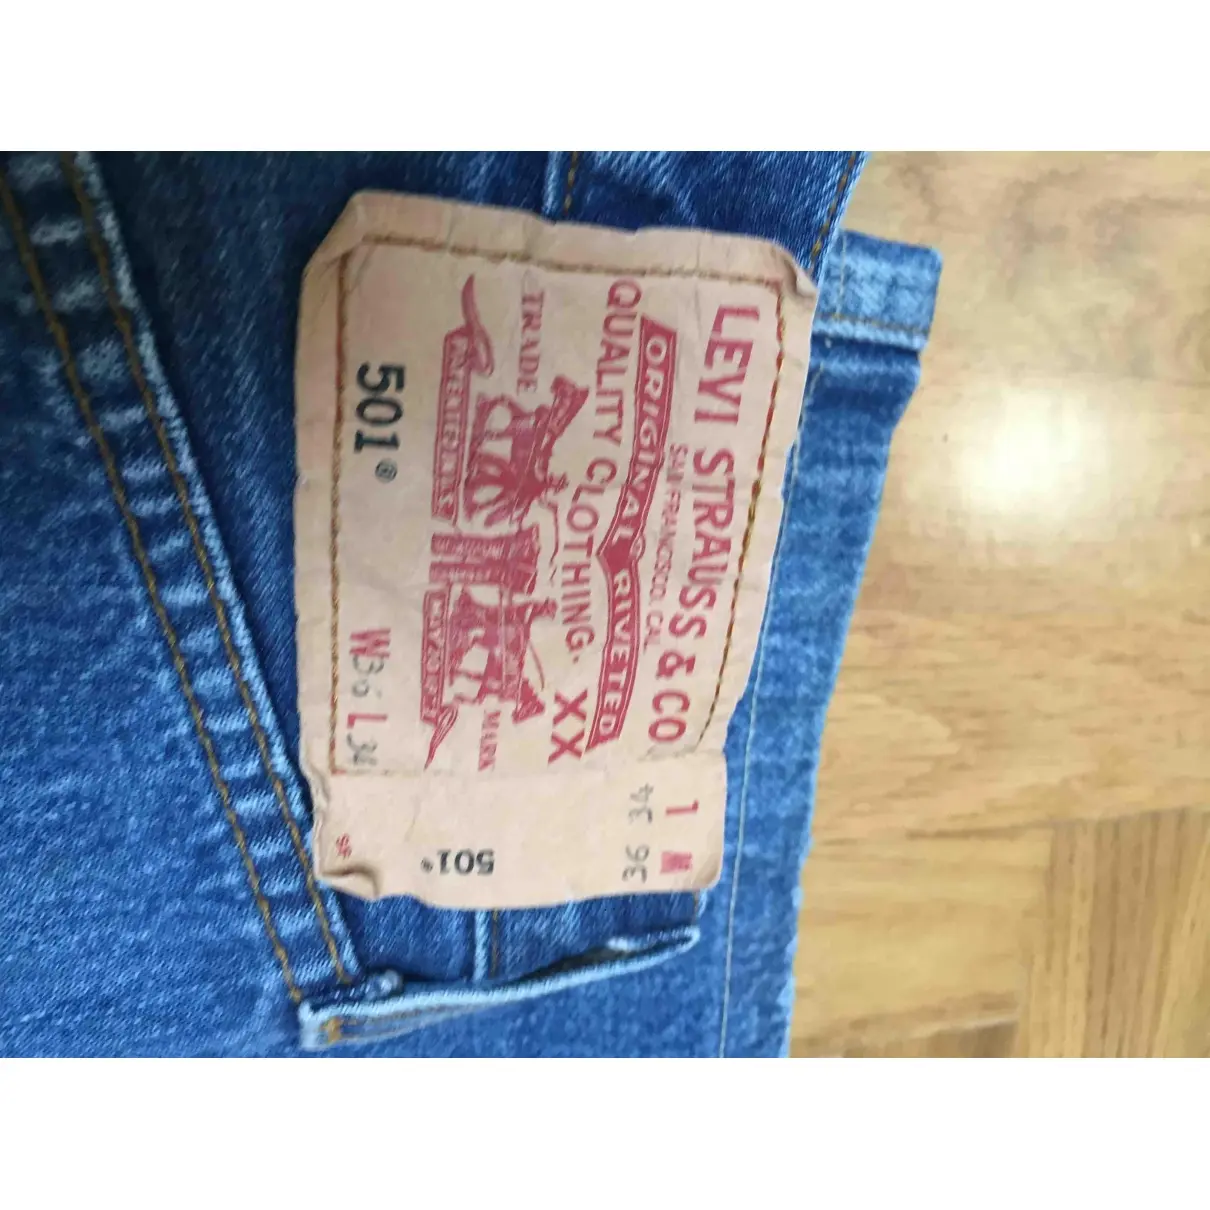 Buy Levi's Vintage Clothing Straight jeans online